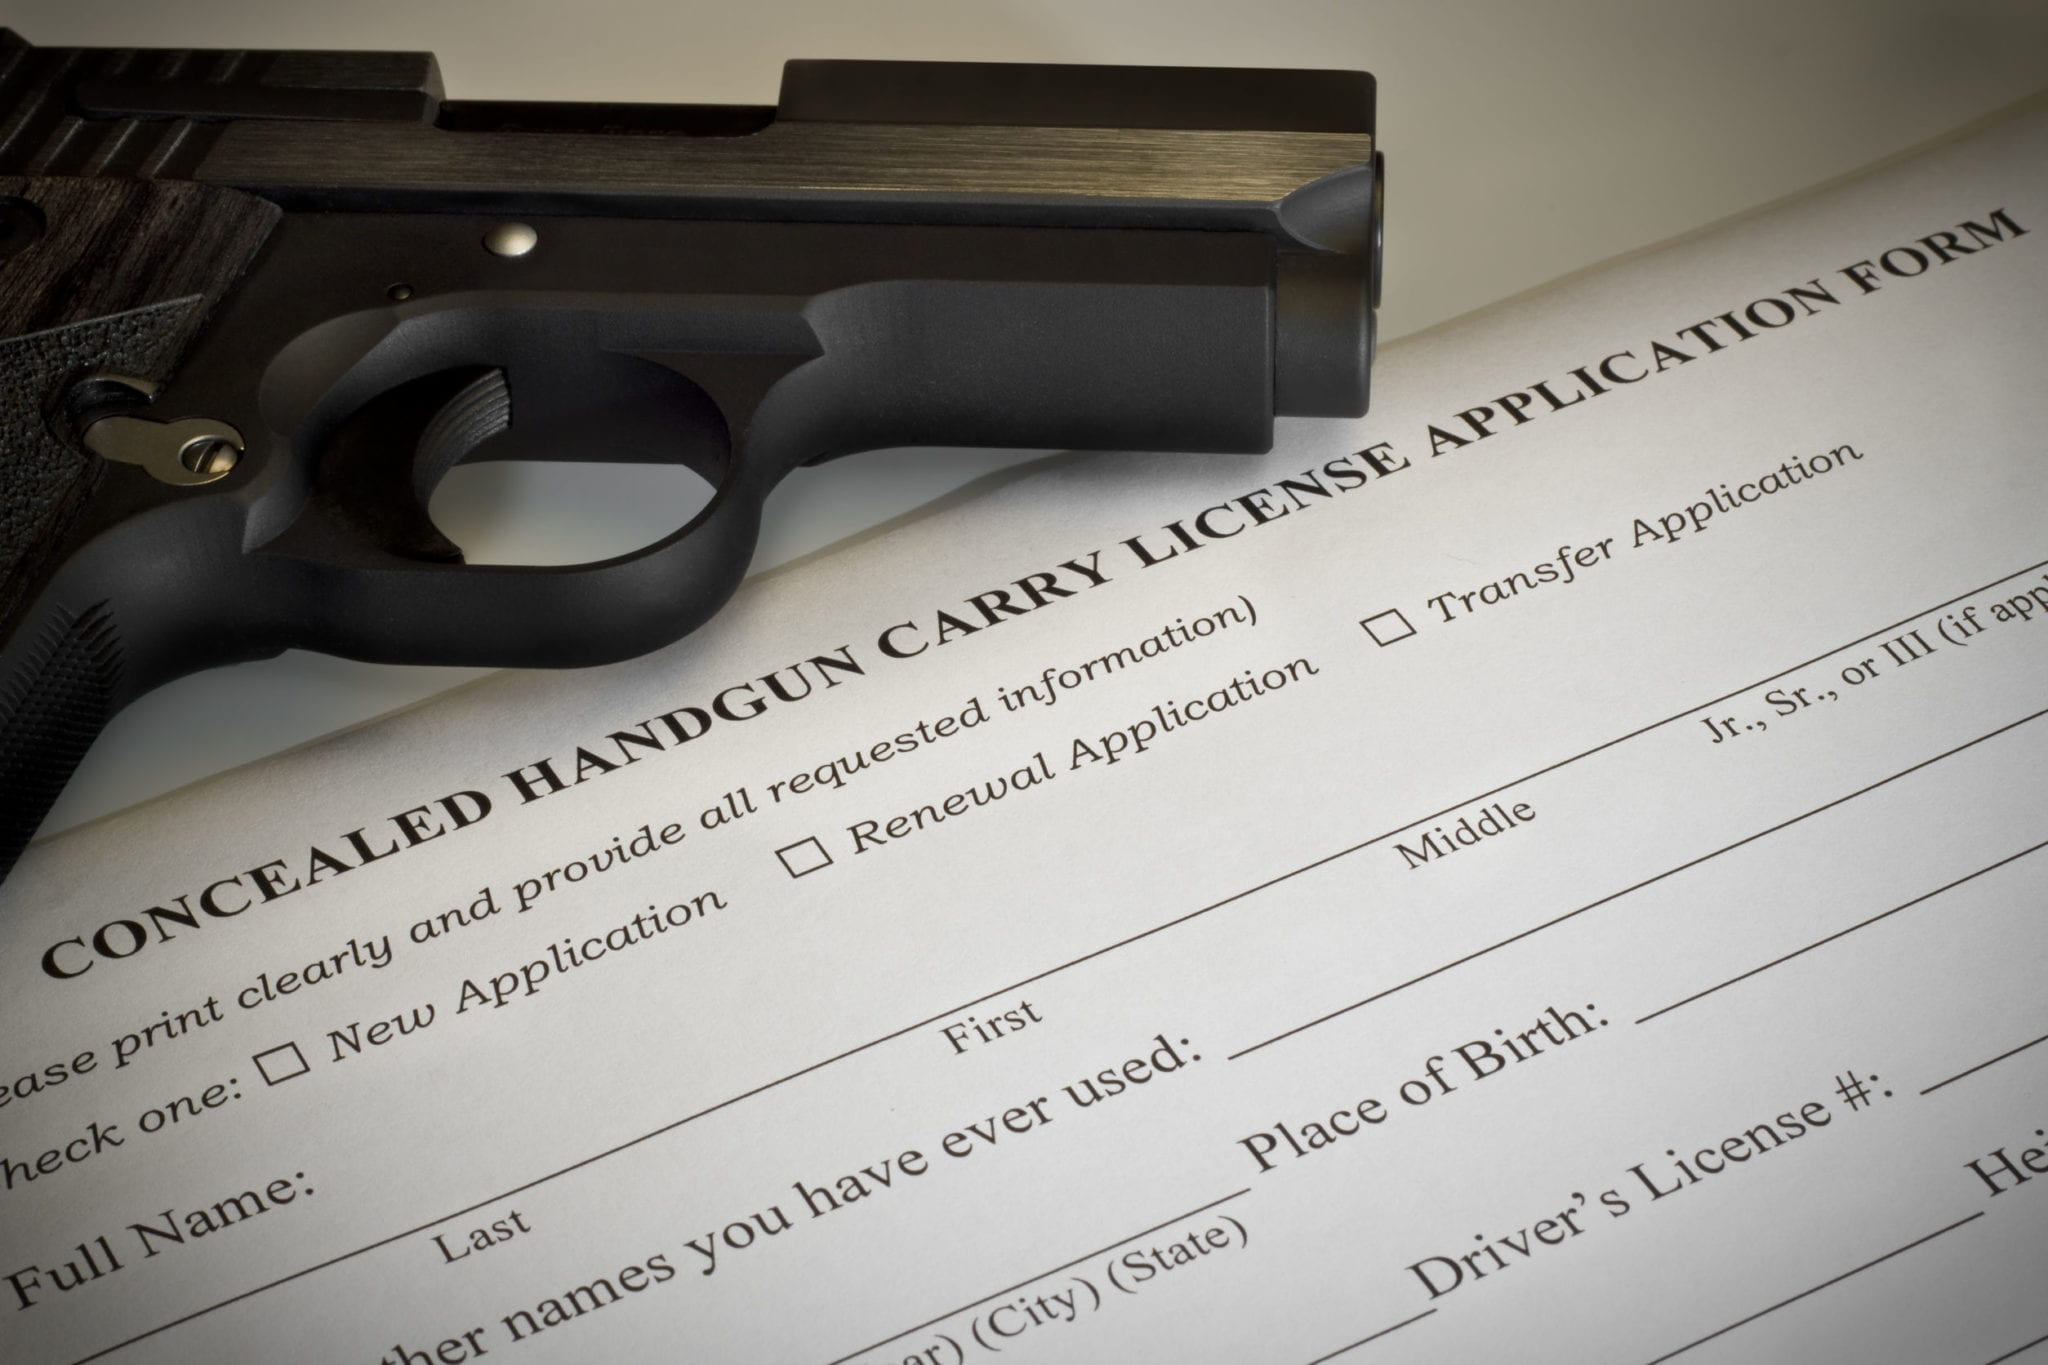 I Have a Texas Concealed Carry License, Where Can I Carry My Firearm?